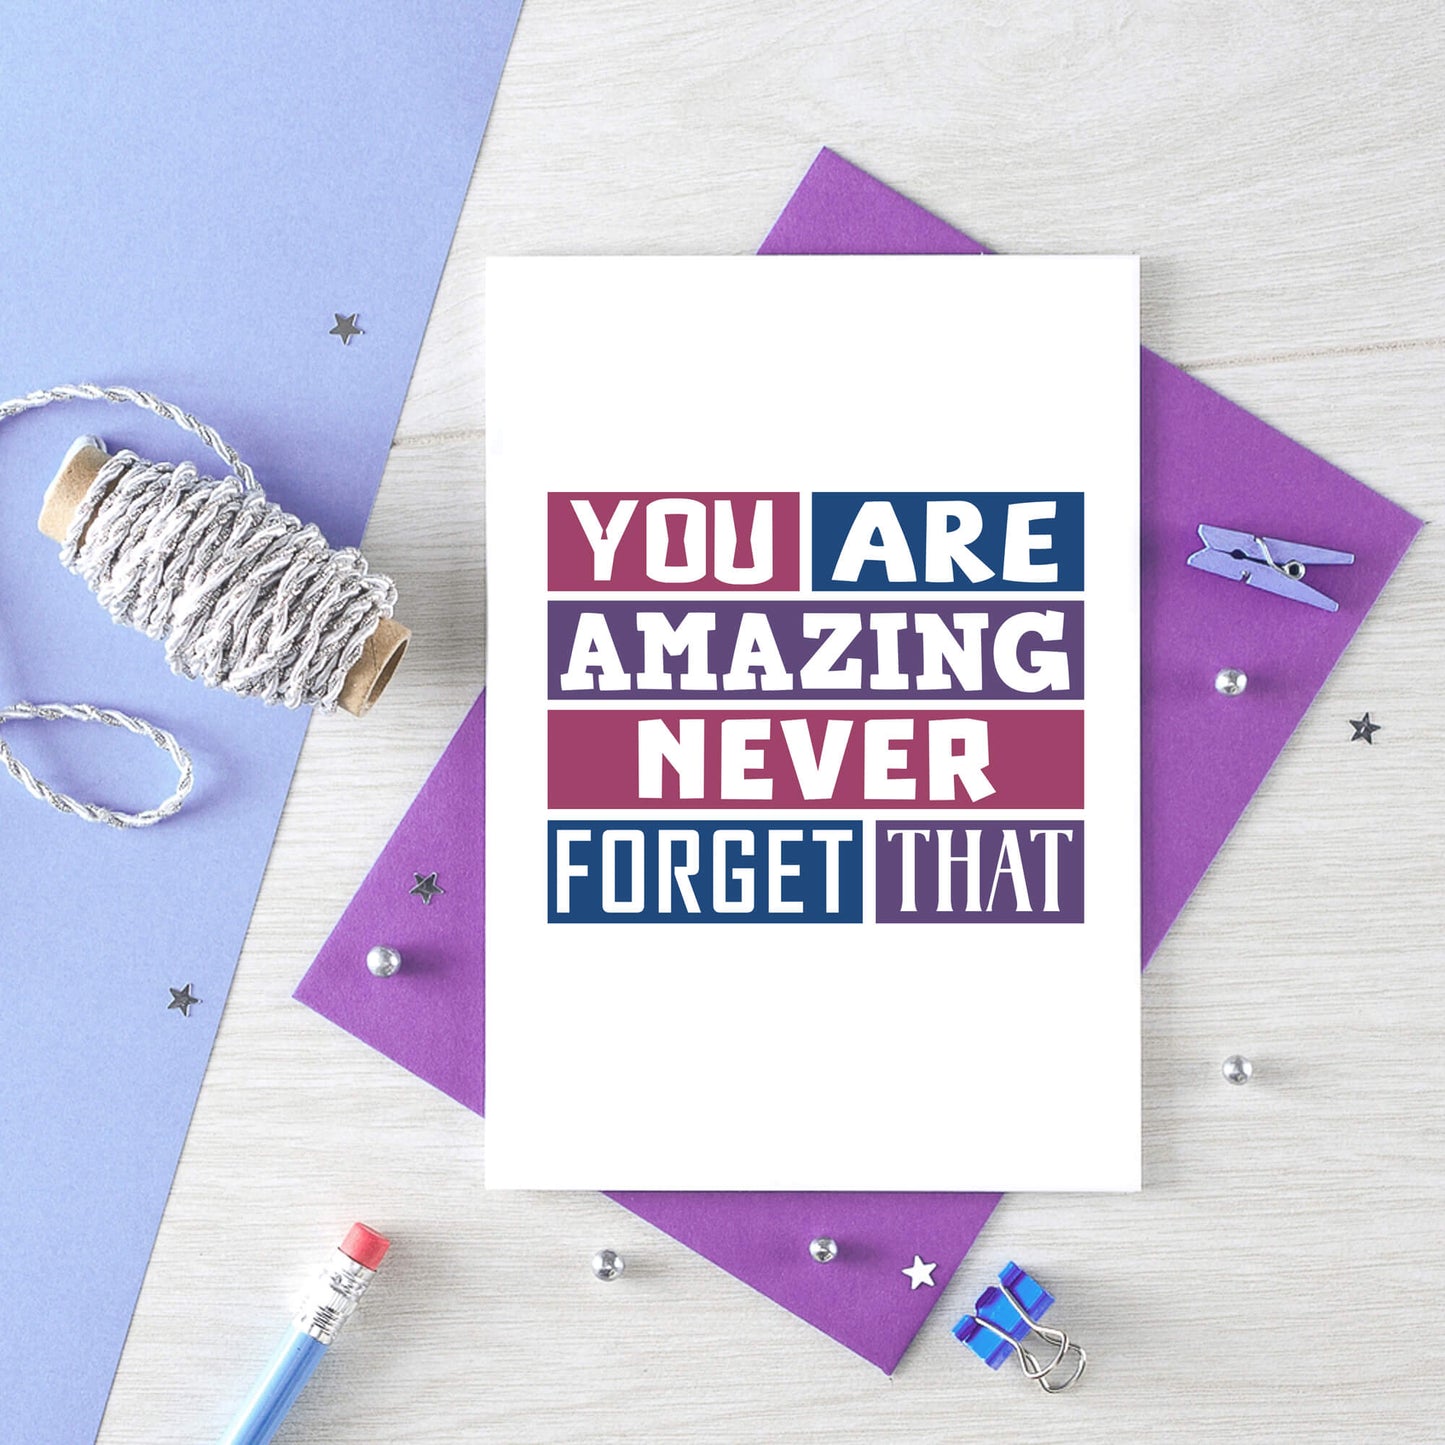 Encouragement Card by SixElevenCreations. Reads You are amazing Never forget that. Product Code SE0256A6